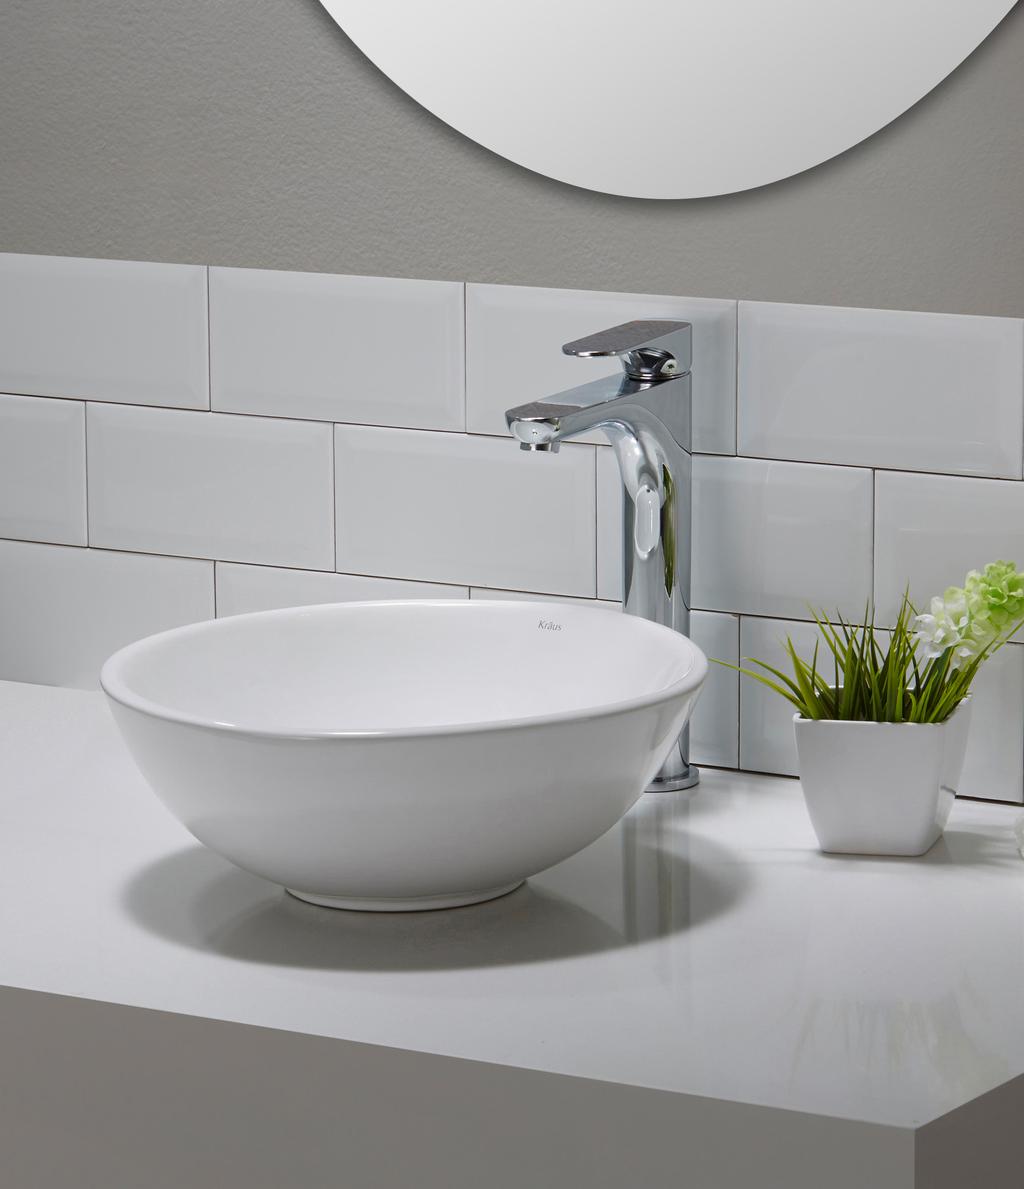 02 KRAUS LAUNCHES NEW SERIES OF BATHROOM SINKS A fresh take on classic white ceramic 10/2015 Port Washington, NY We ve expanded our collection of bathroom sinks with a range of new models to address